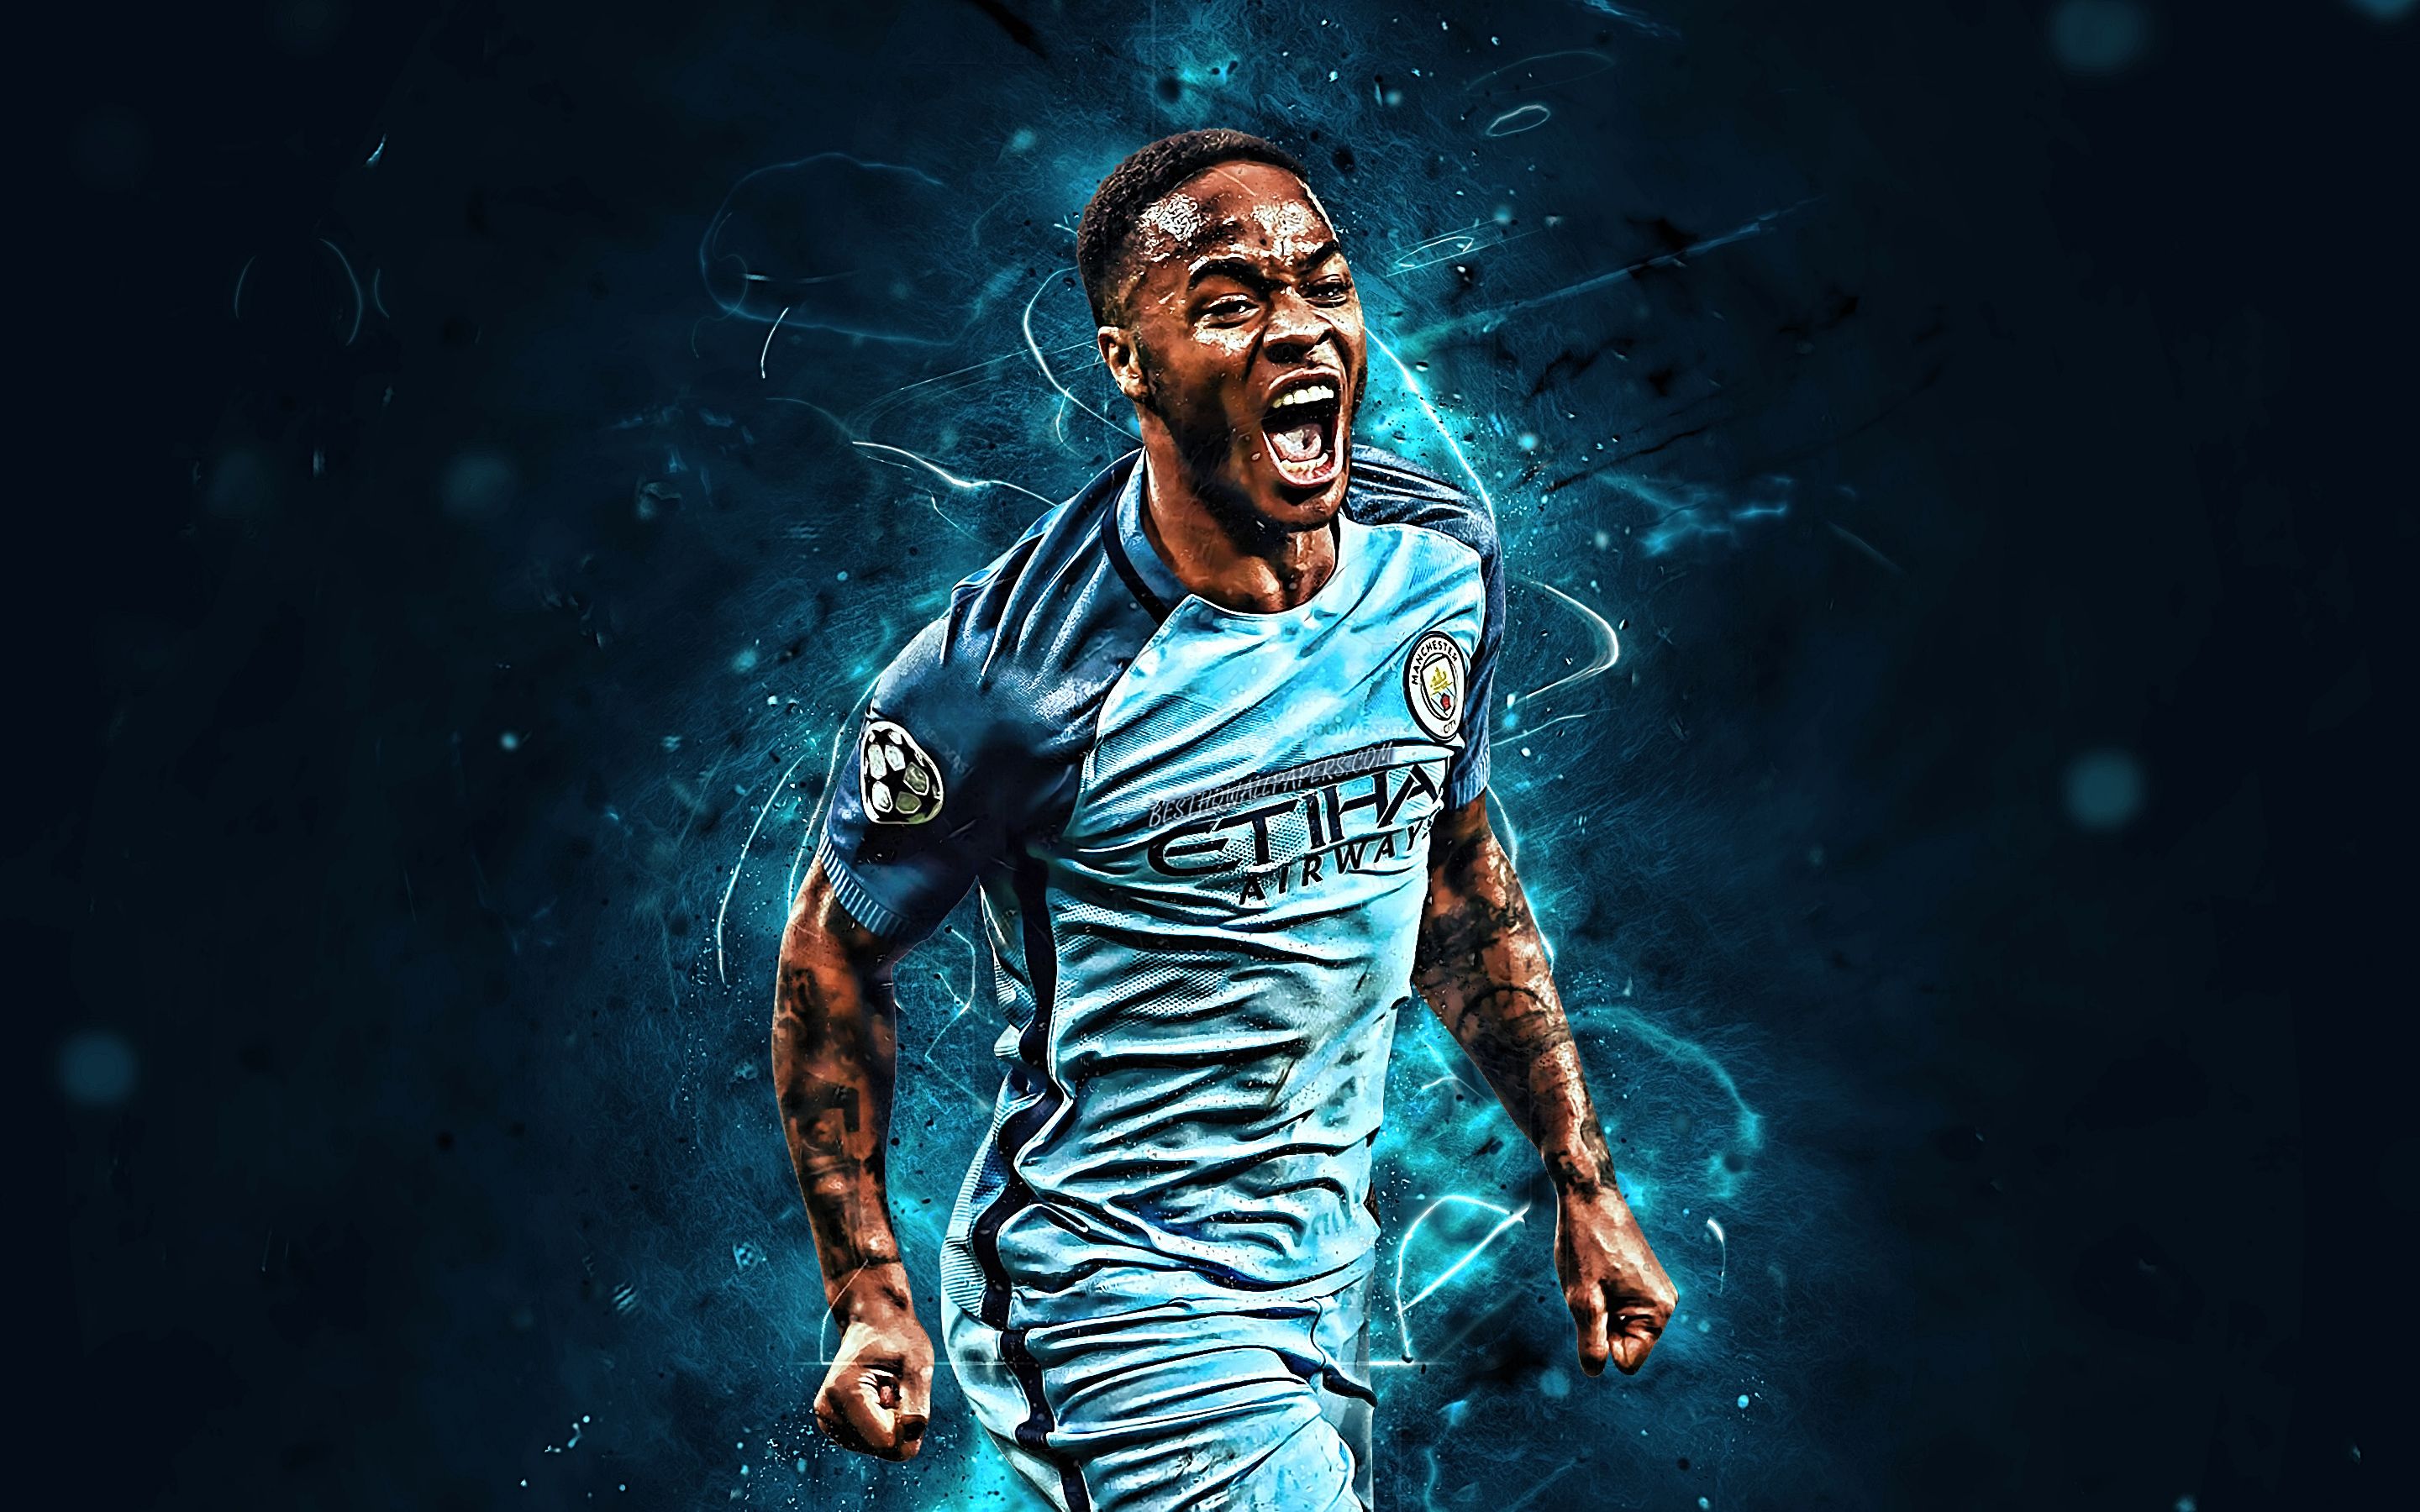 Download wallpaper Raheem Sterling, goal, Manchester City FC, joy, english footballers, soccer, Raheem Shaquille Sterling, Premier League, Man City, England, football, neon lights for desktop with resolution 2880x1800. High Quality HD picture